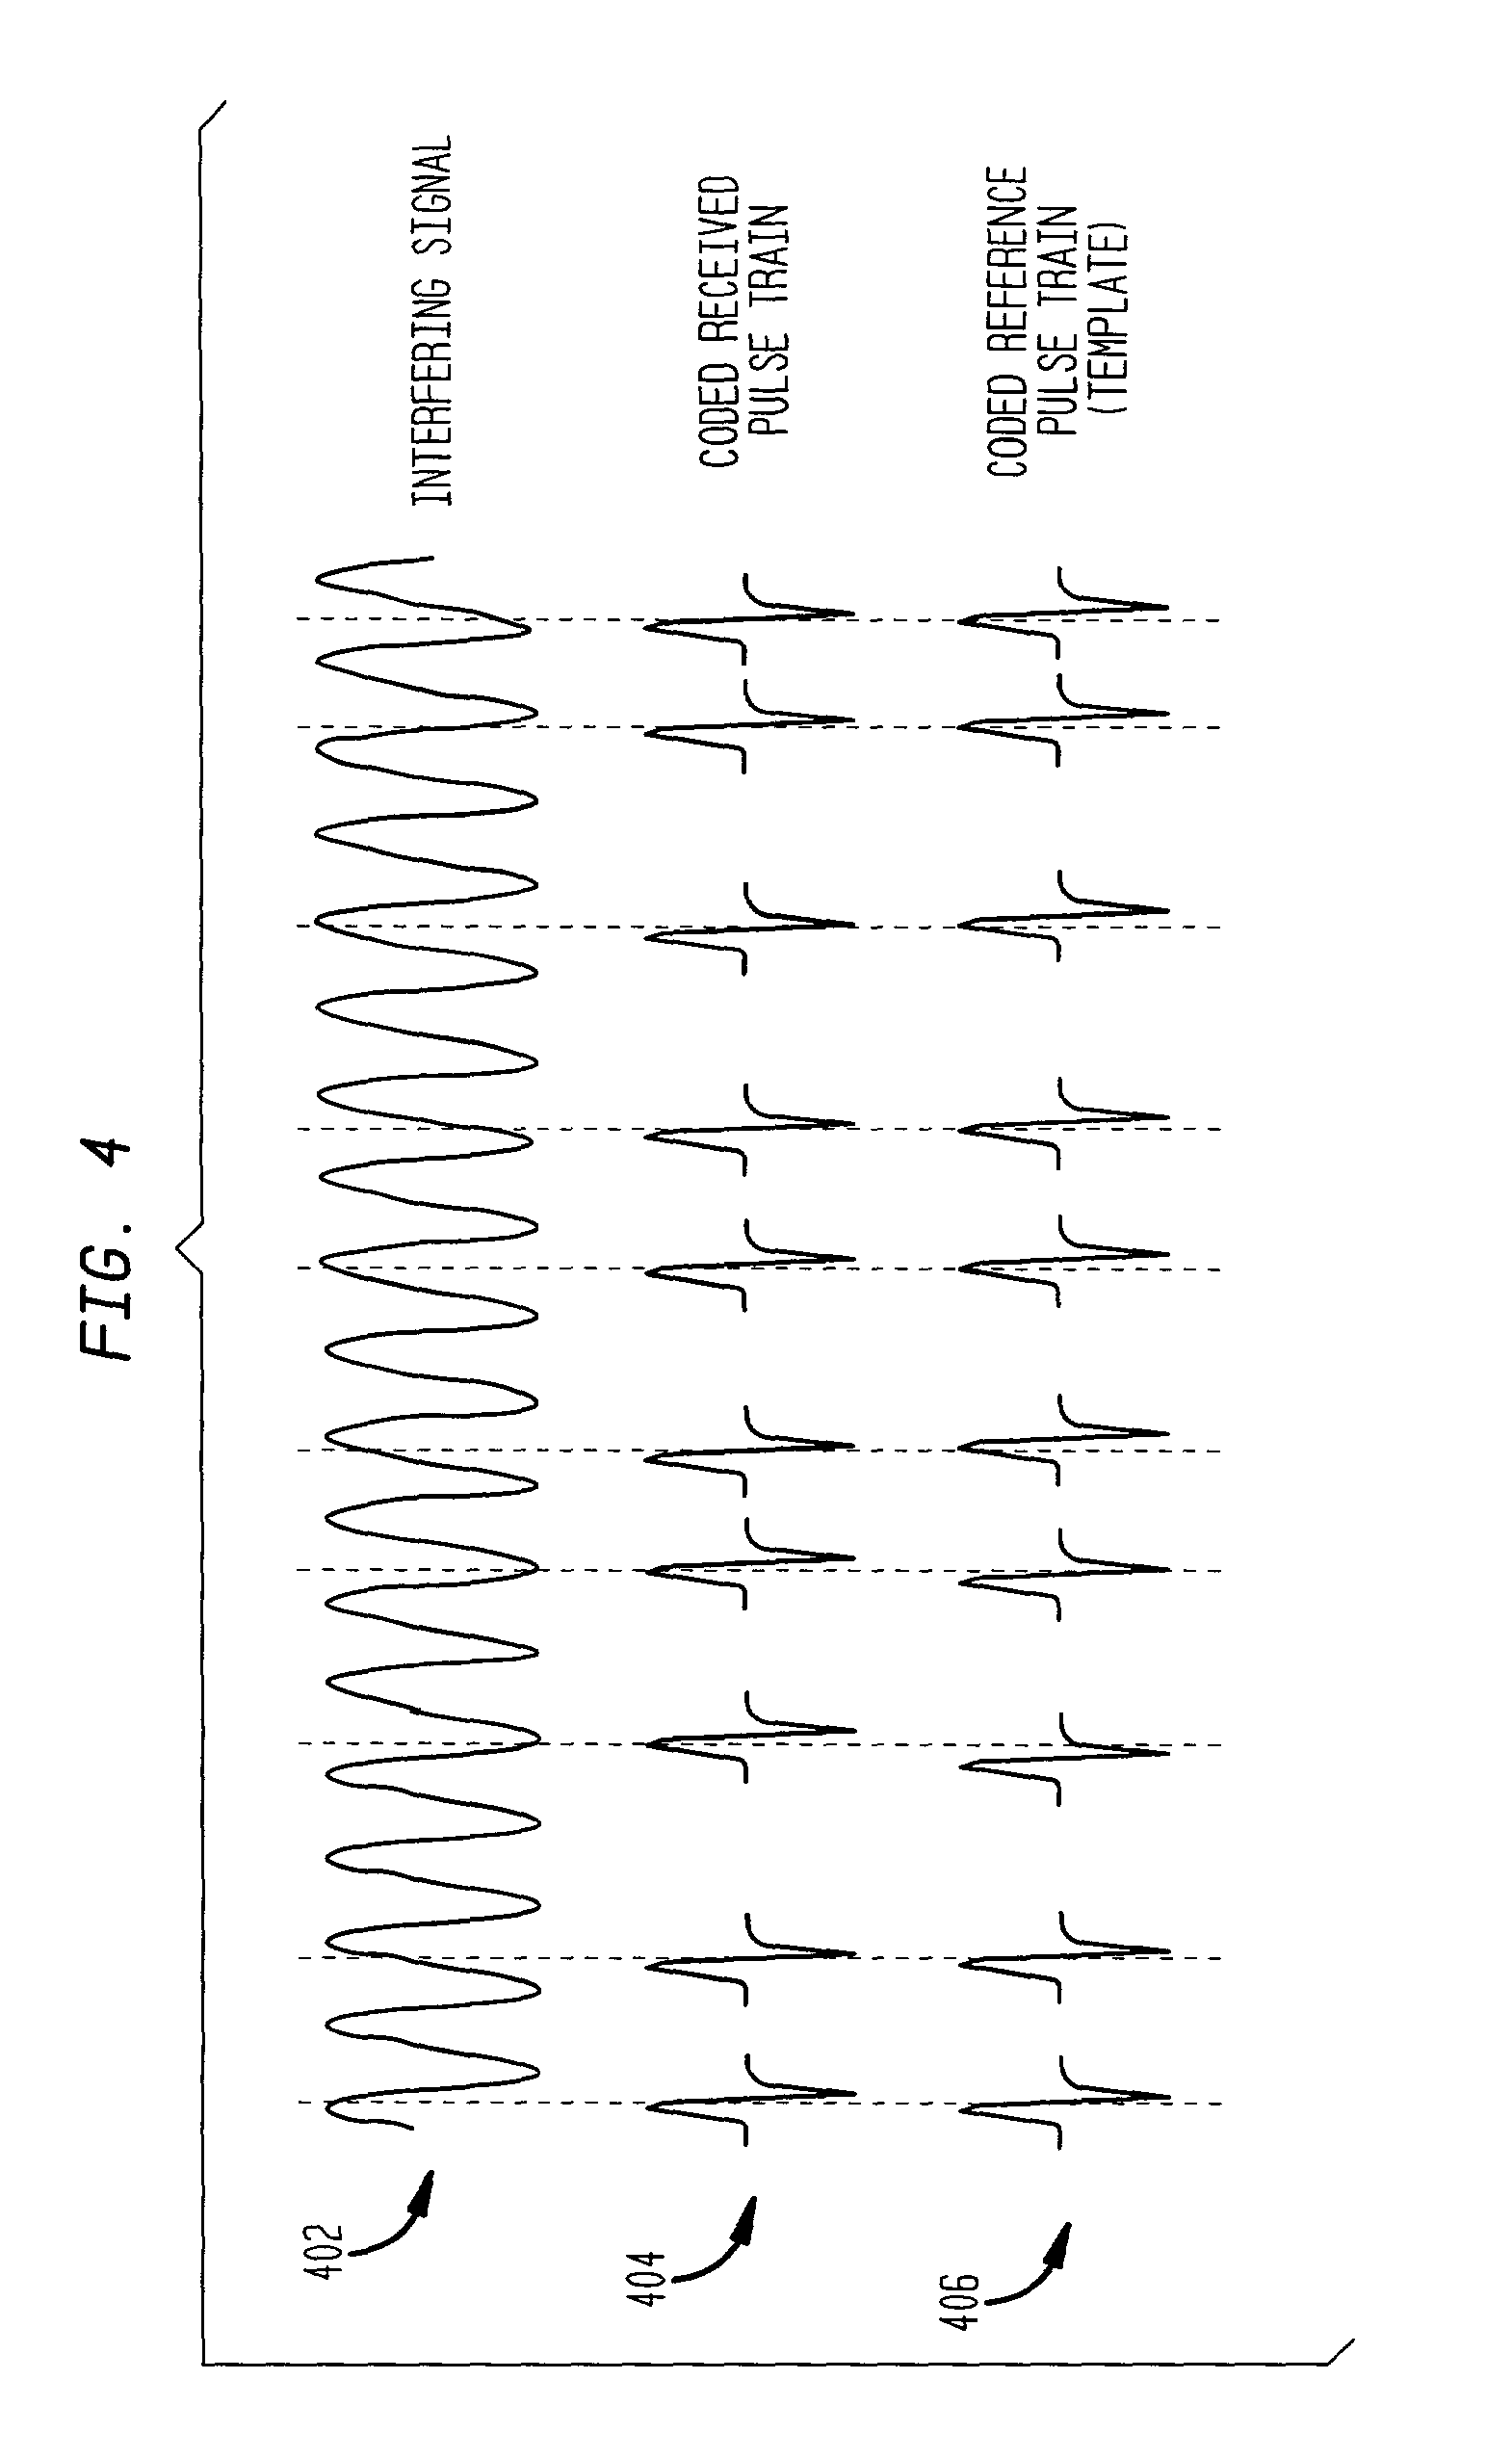 System and method for medium wide band communications by impulse radio